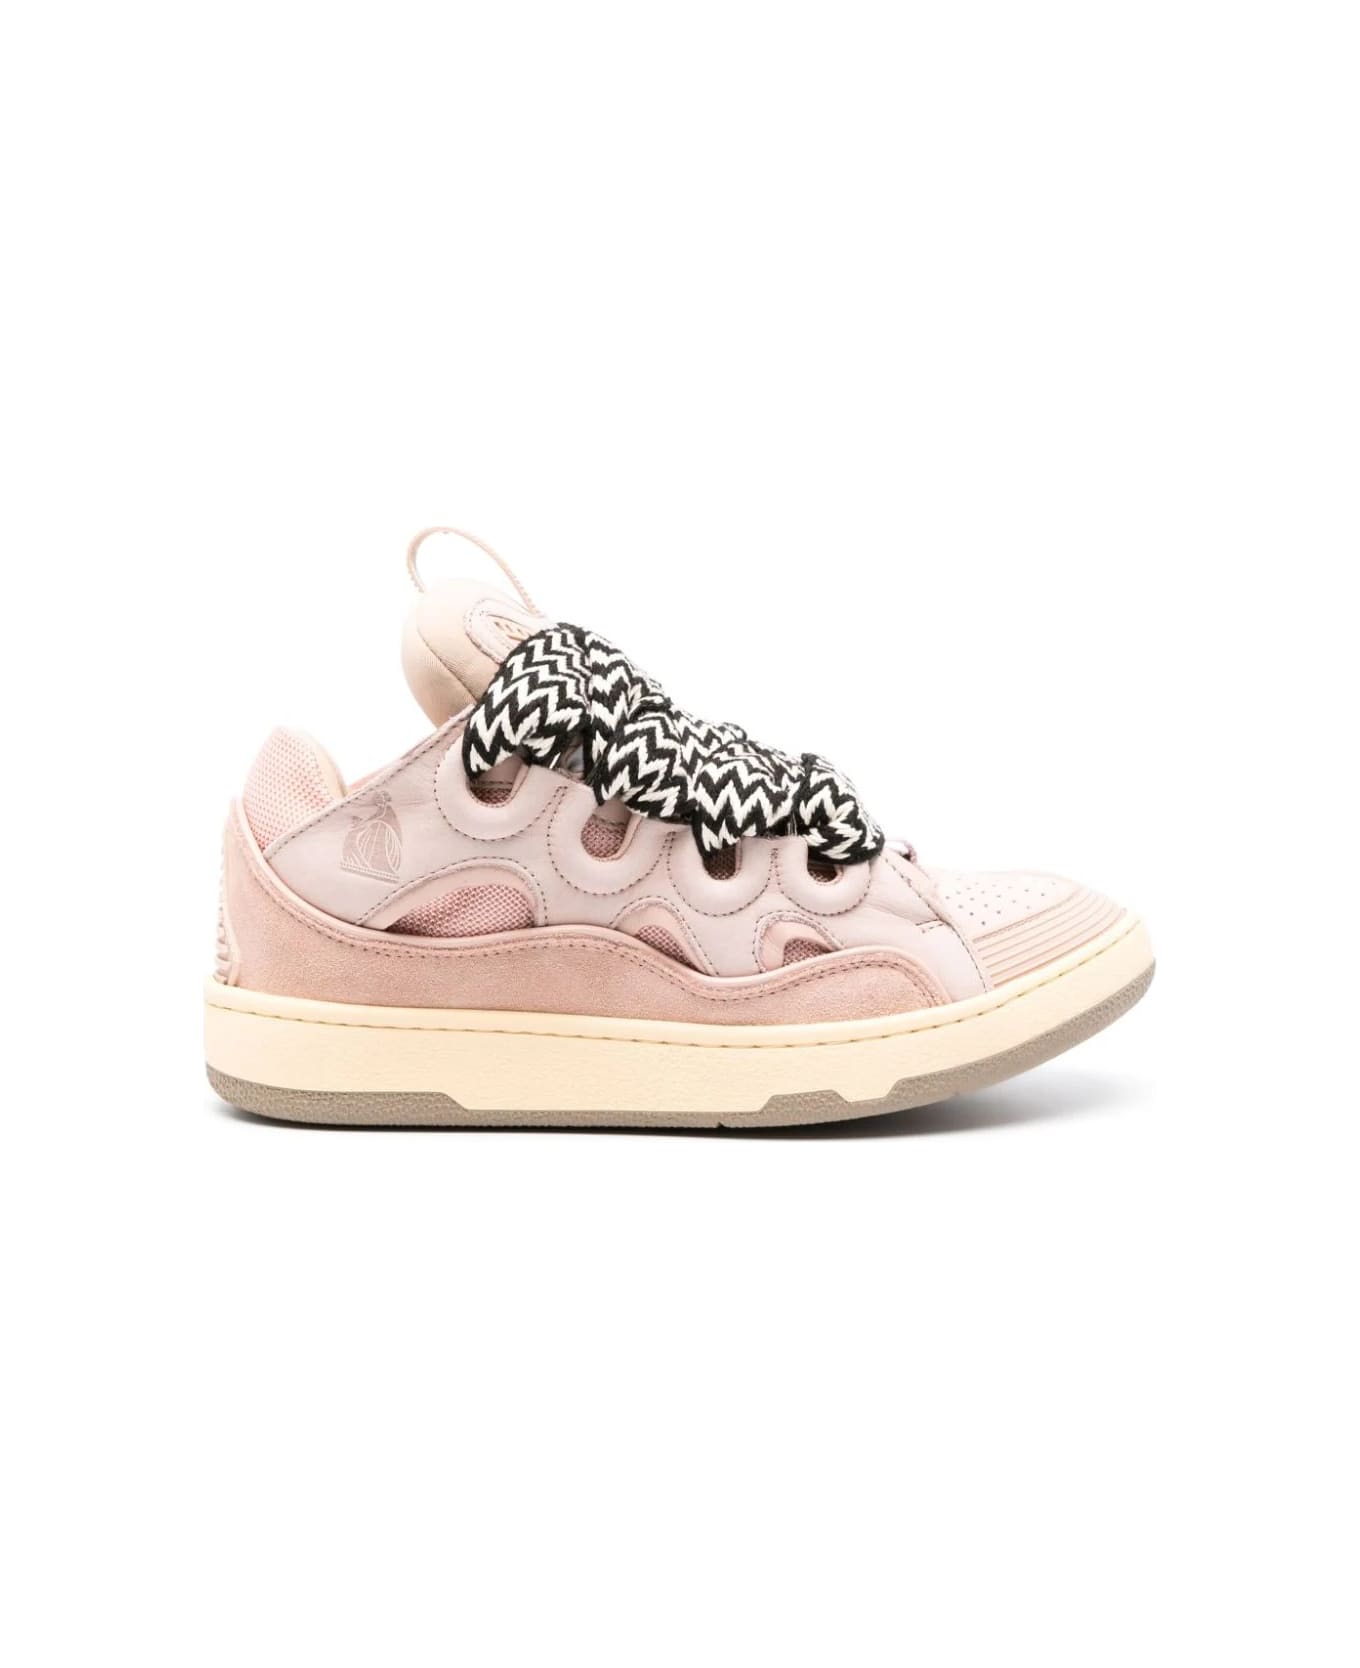 Lanvin Curb Sneakers In Pink Leather - Pink